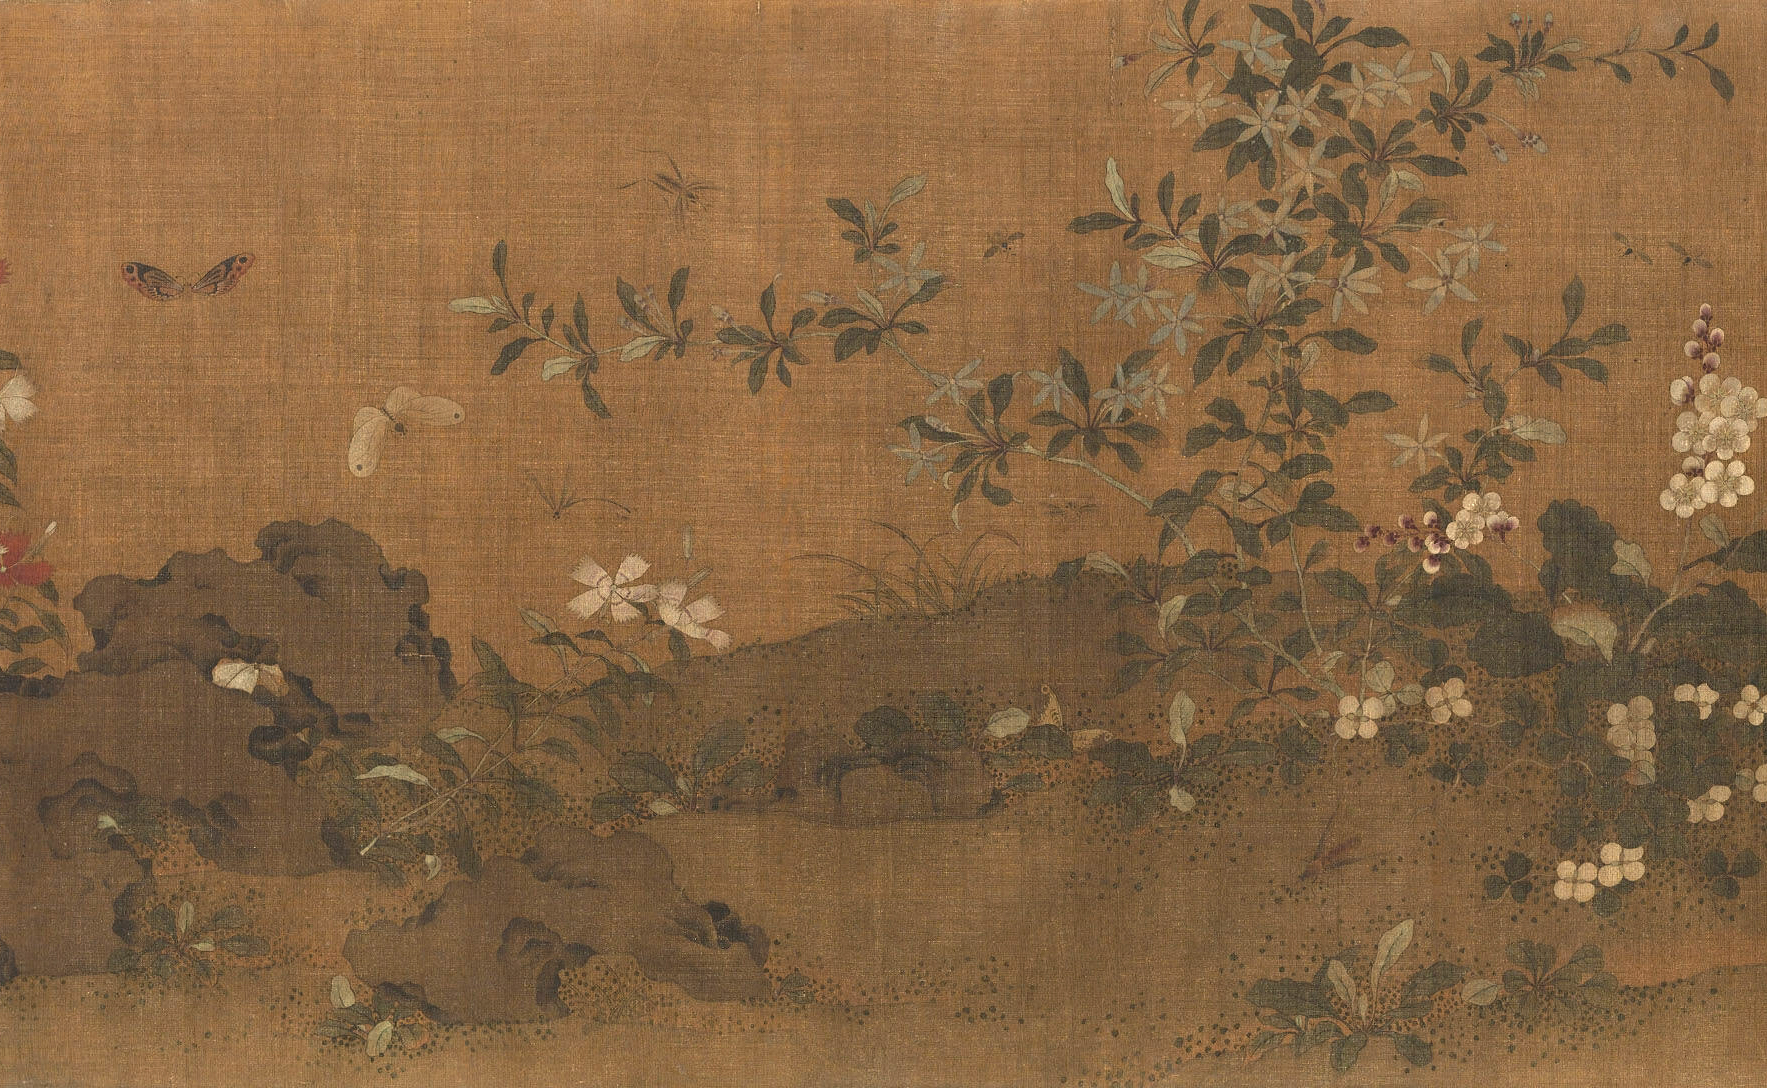 Northern Song Dynasty painting captures flowers, insects